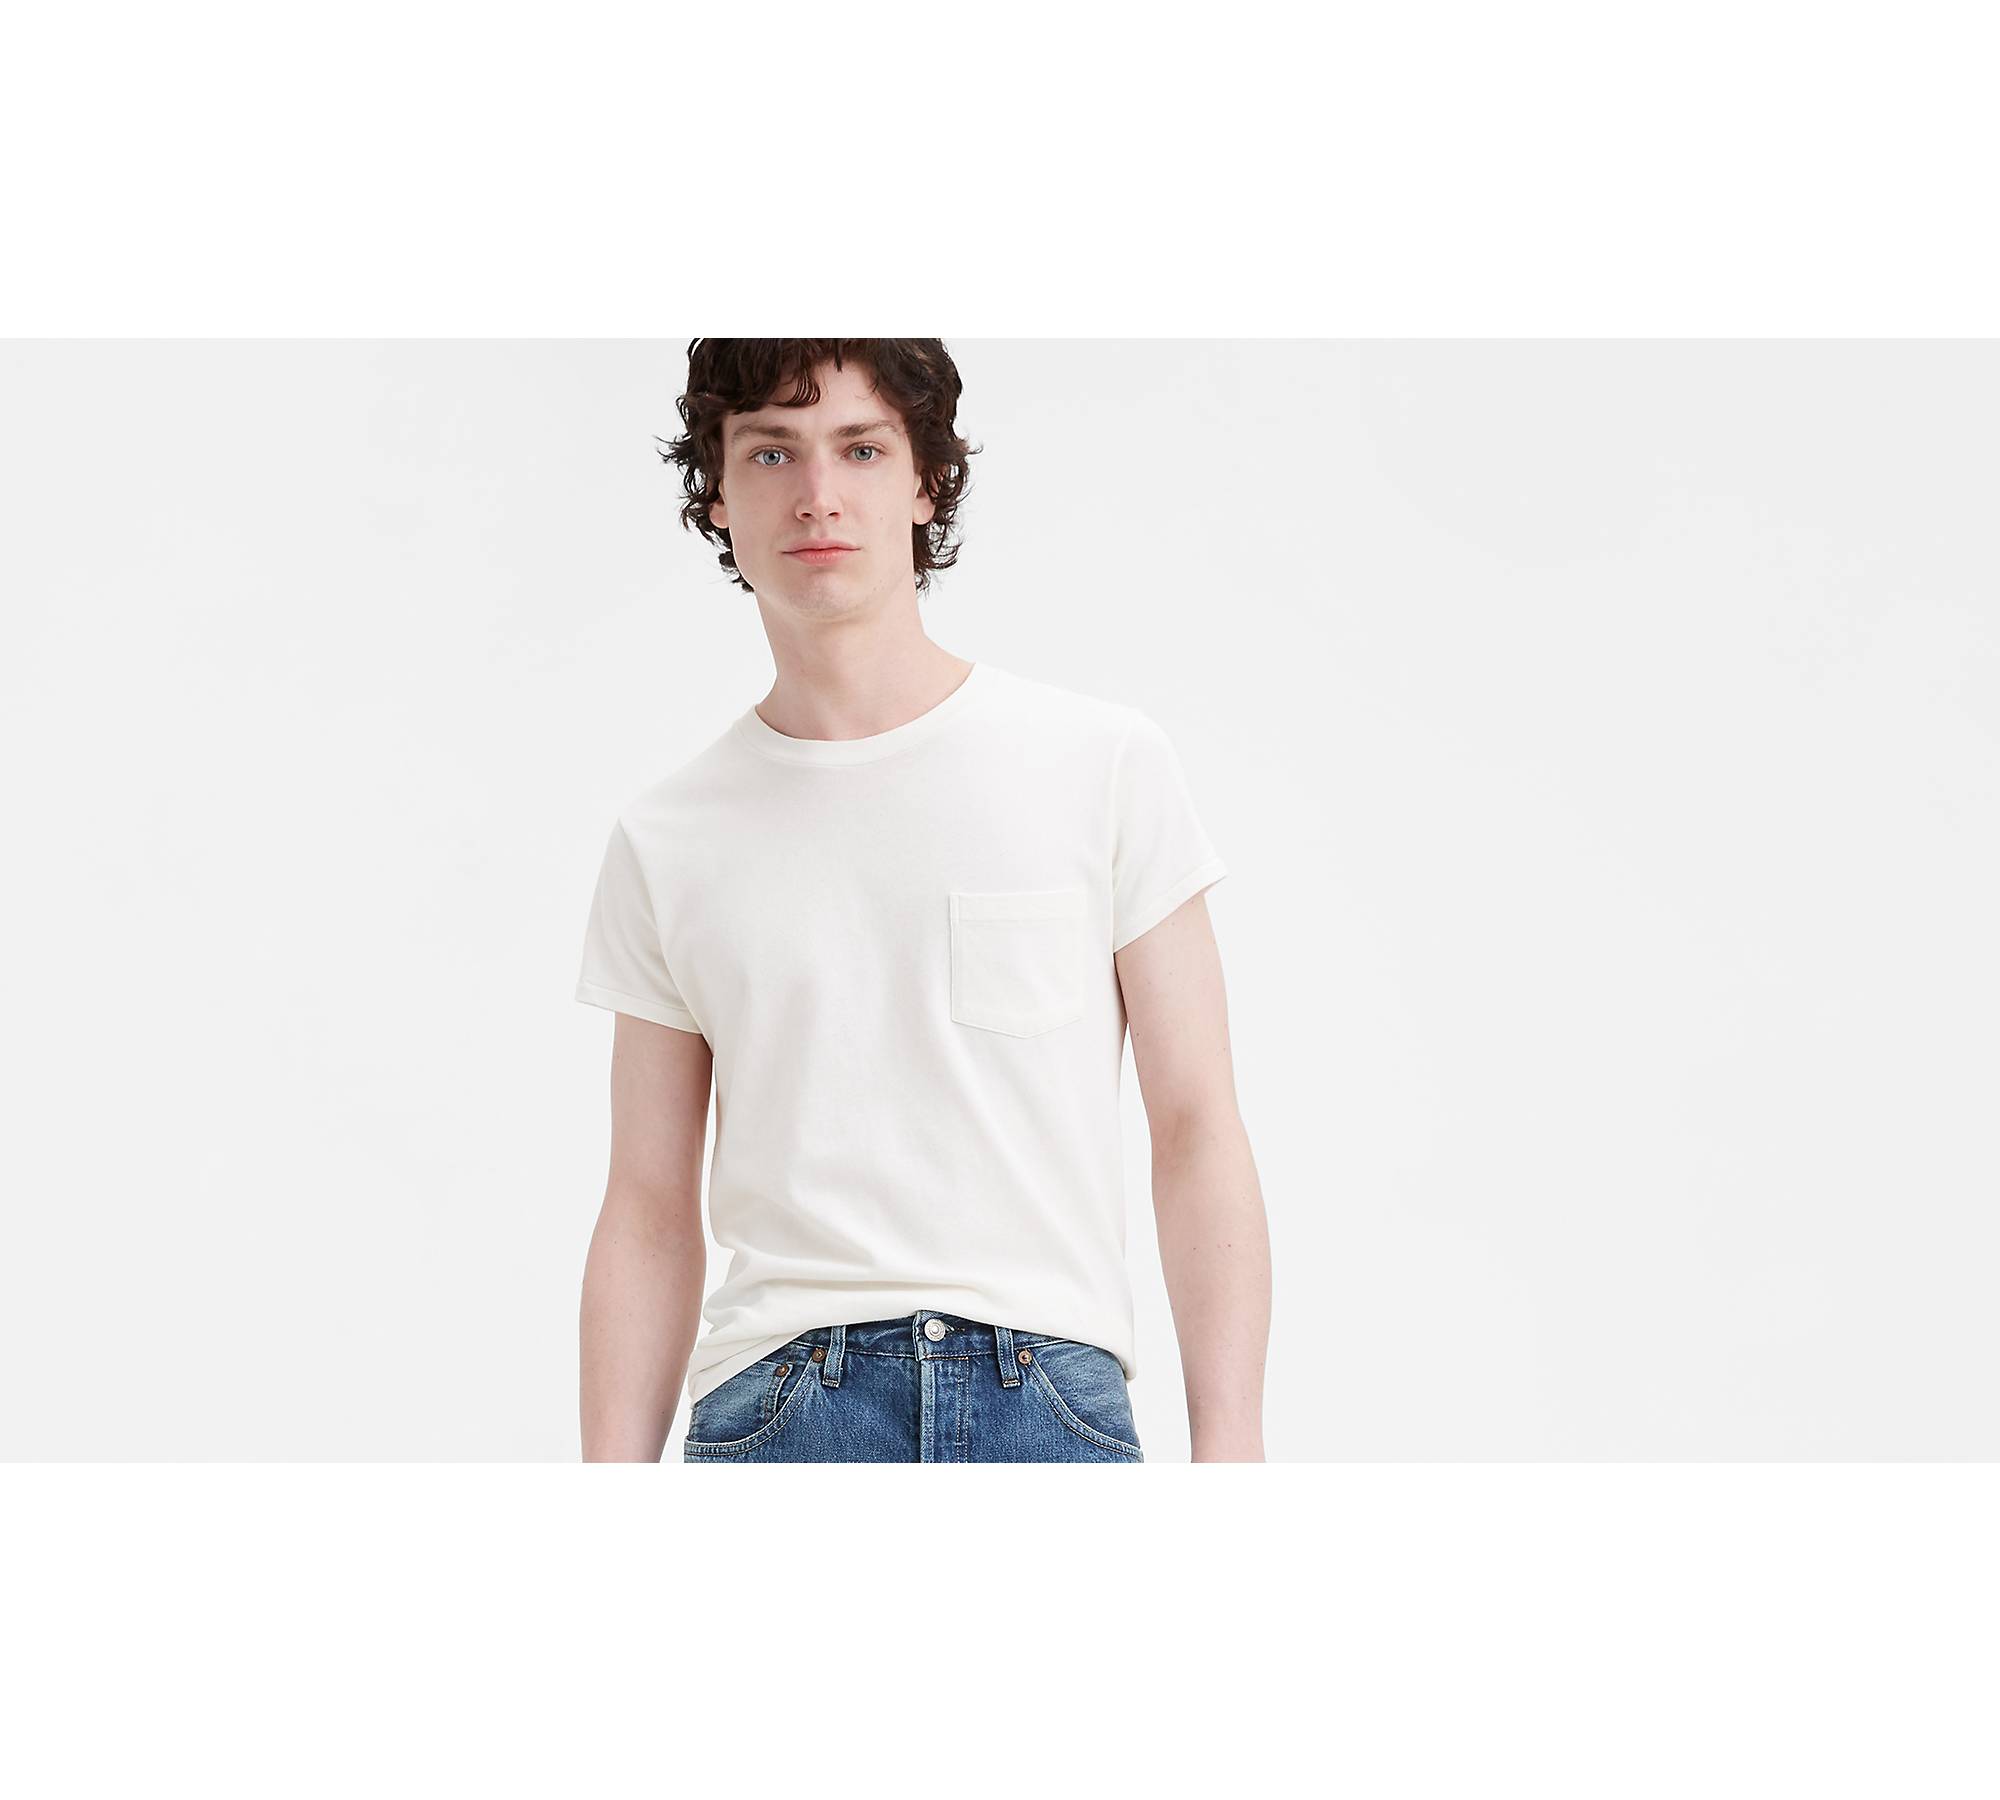 American Fit T-shirt: Men's Tall Pocket White Tee